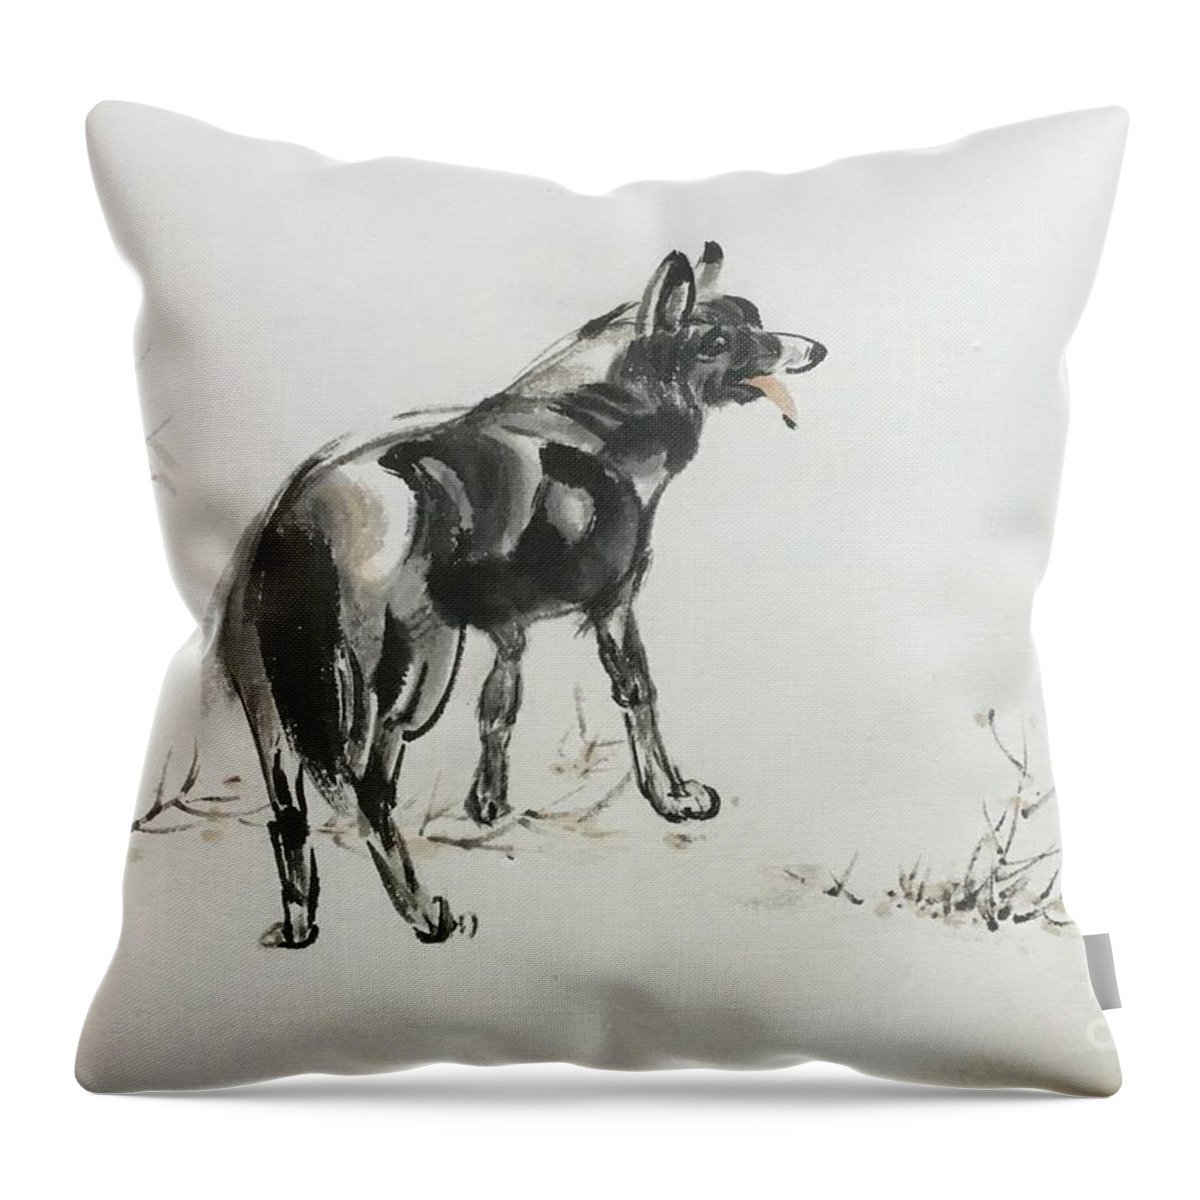 Dog Portrait Throw Pillow featuring the painting I Am Happy Here by Carmen Lam